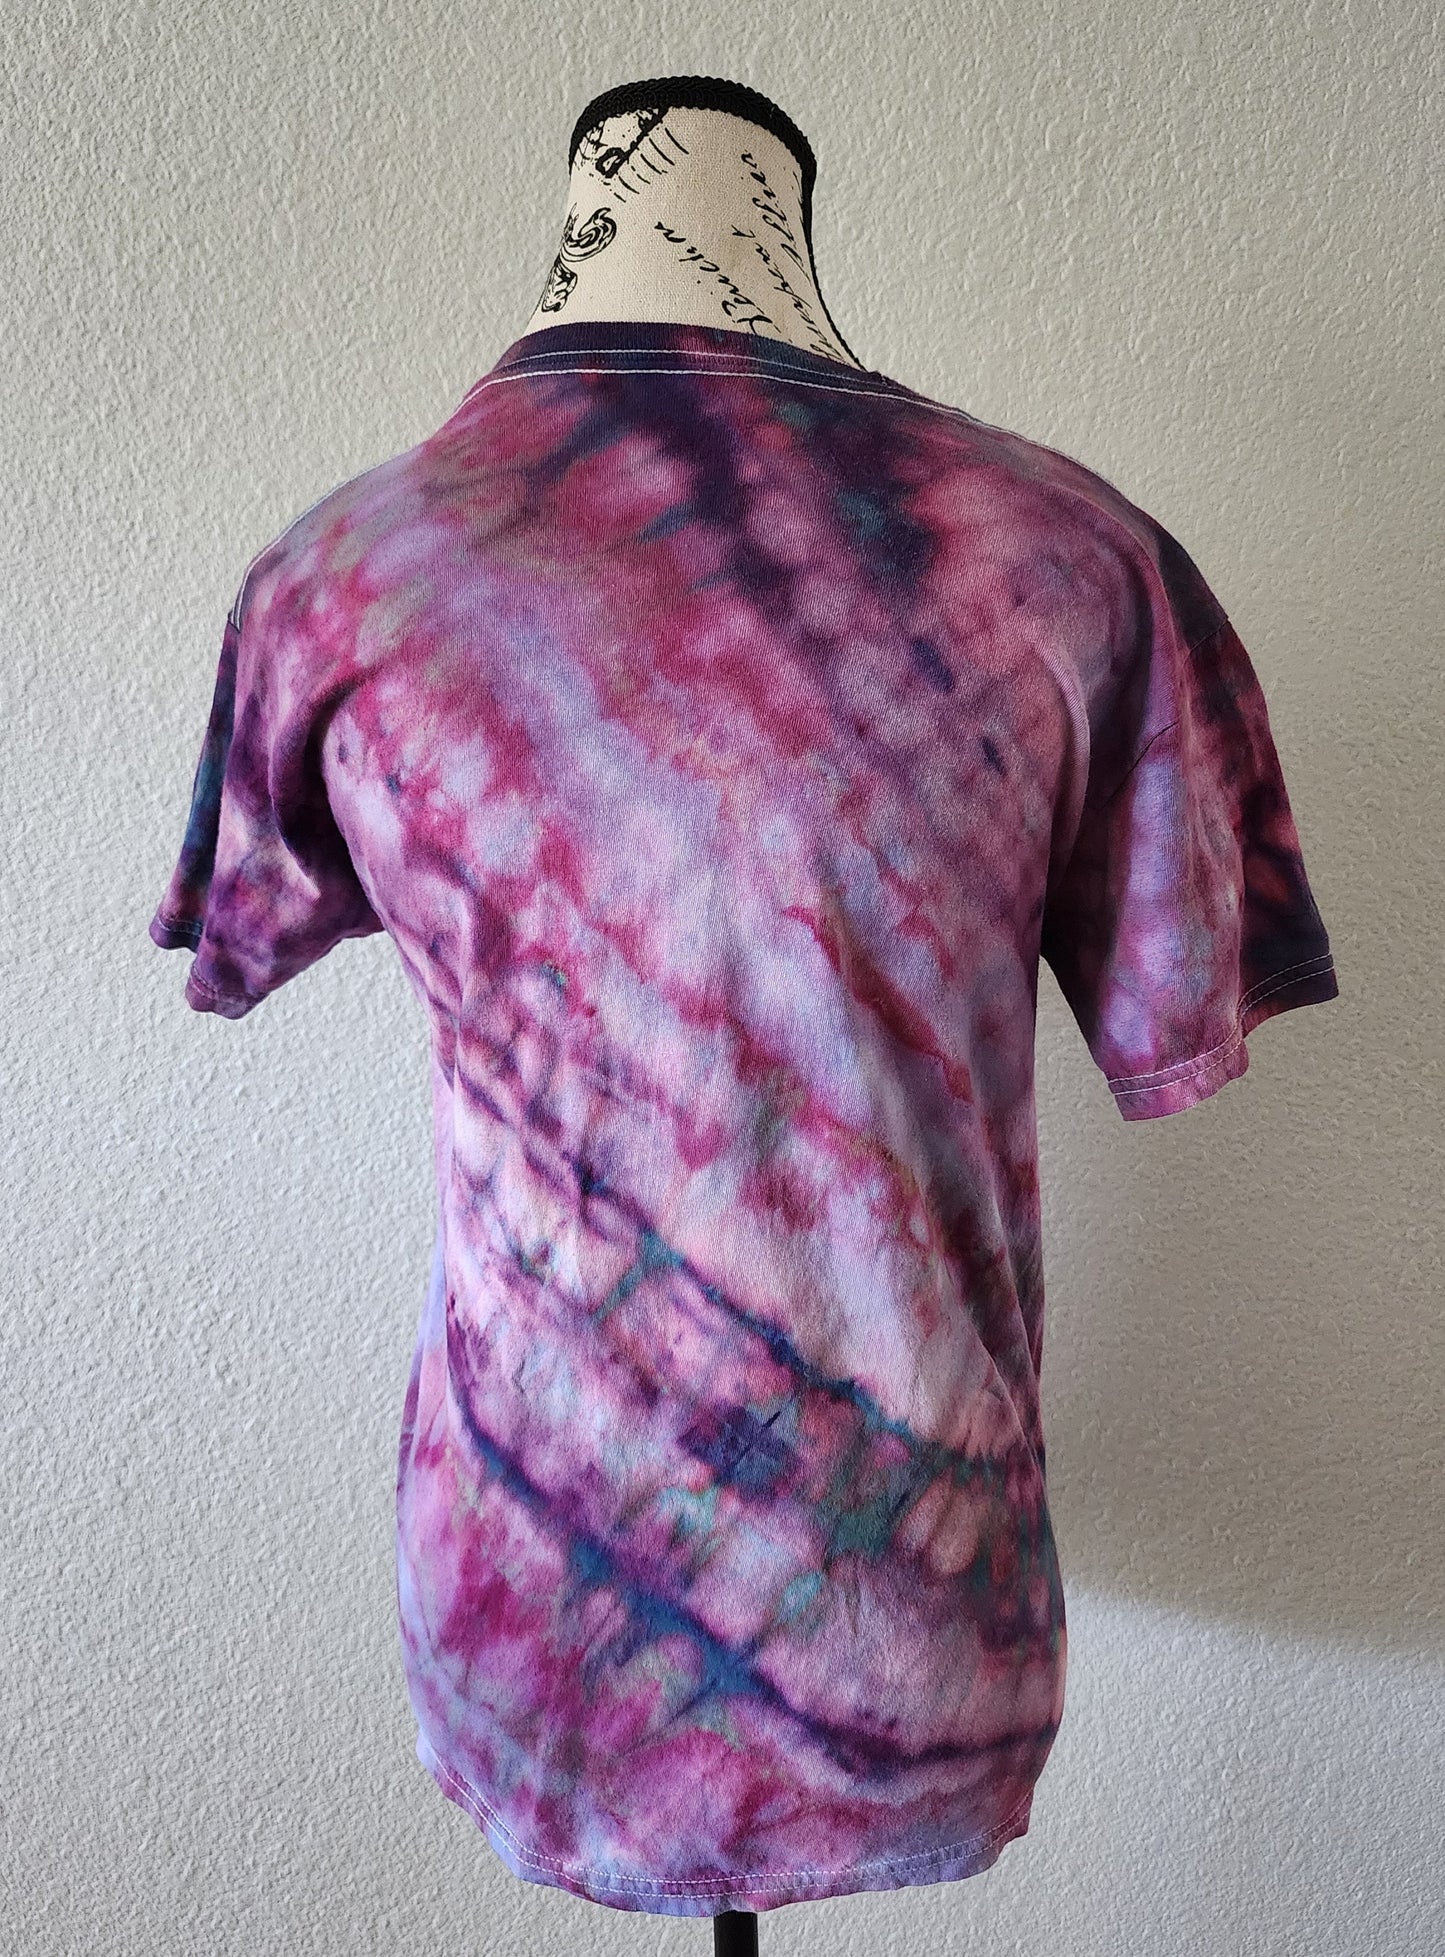 Candy Pink Tie Dye T Shirt Customizable Unisex Size S